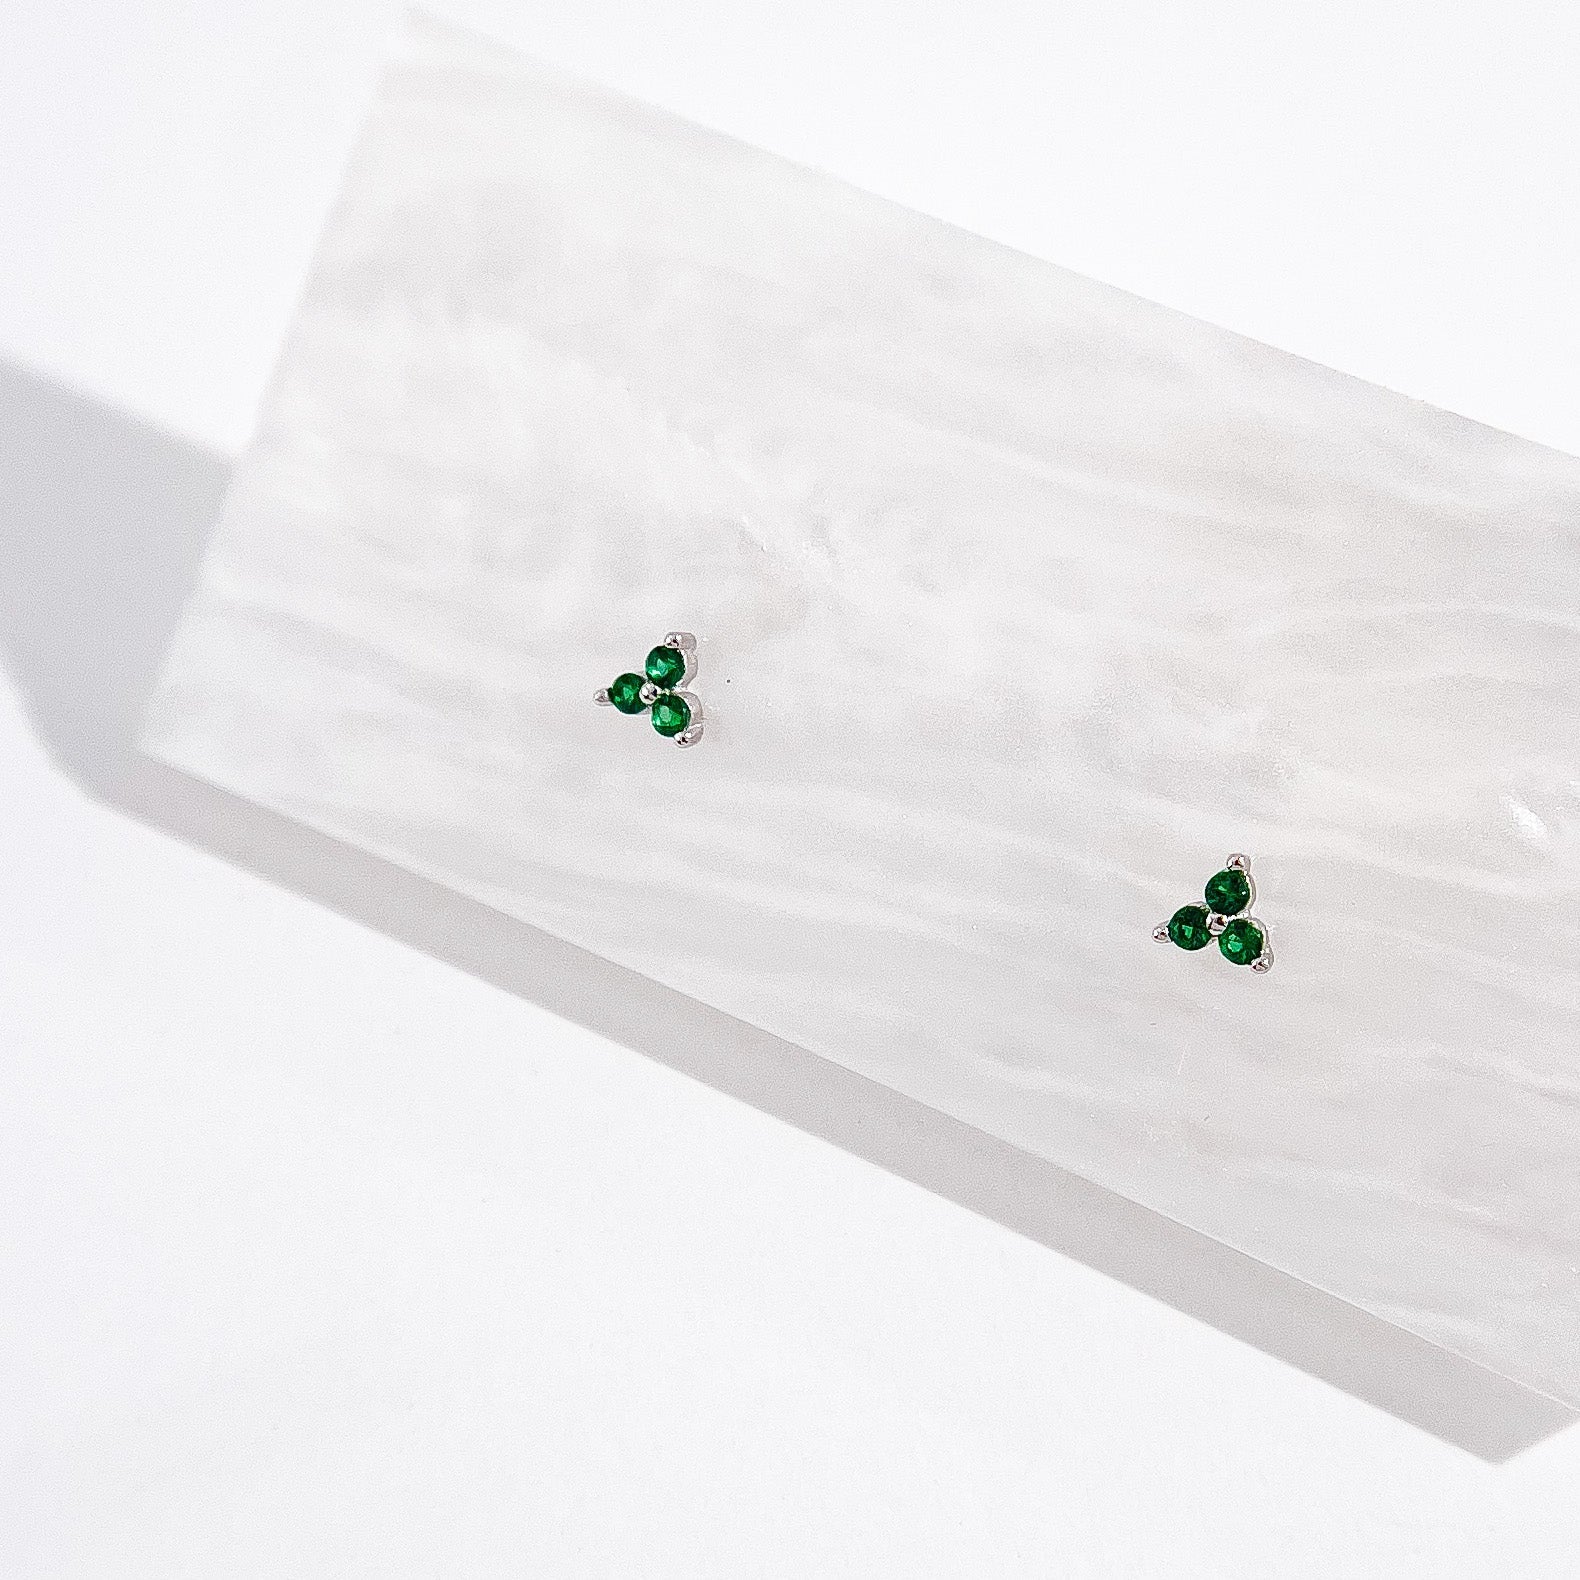 Green Twinkle Studs in Silver - Flaire & Co.